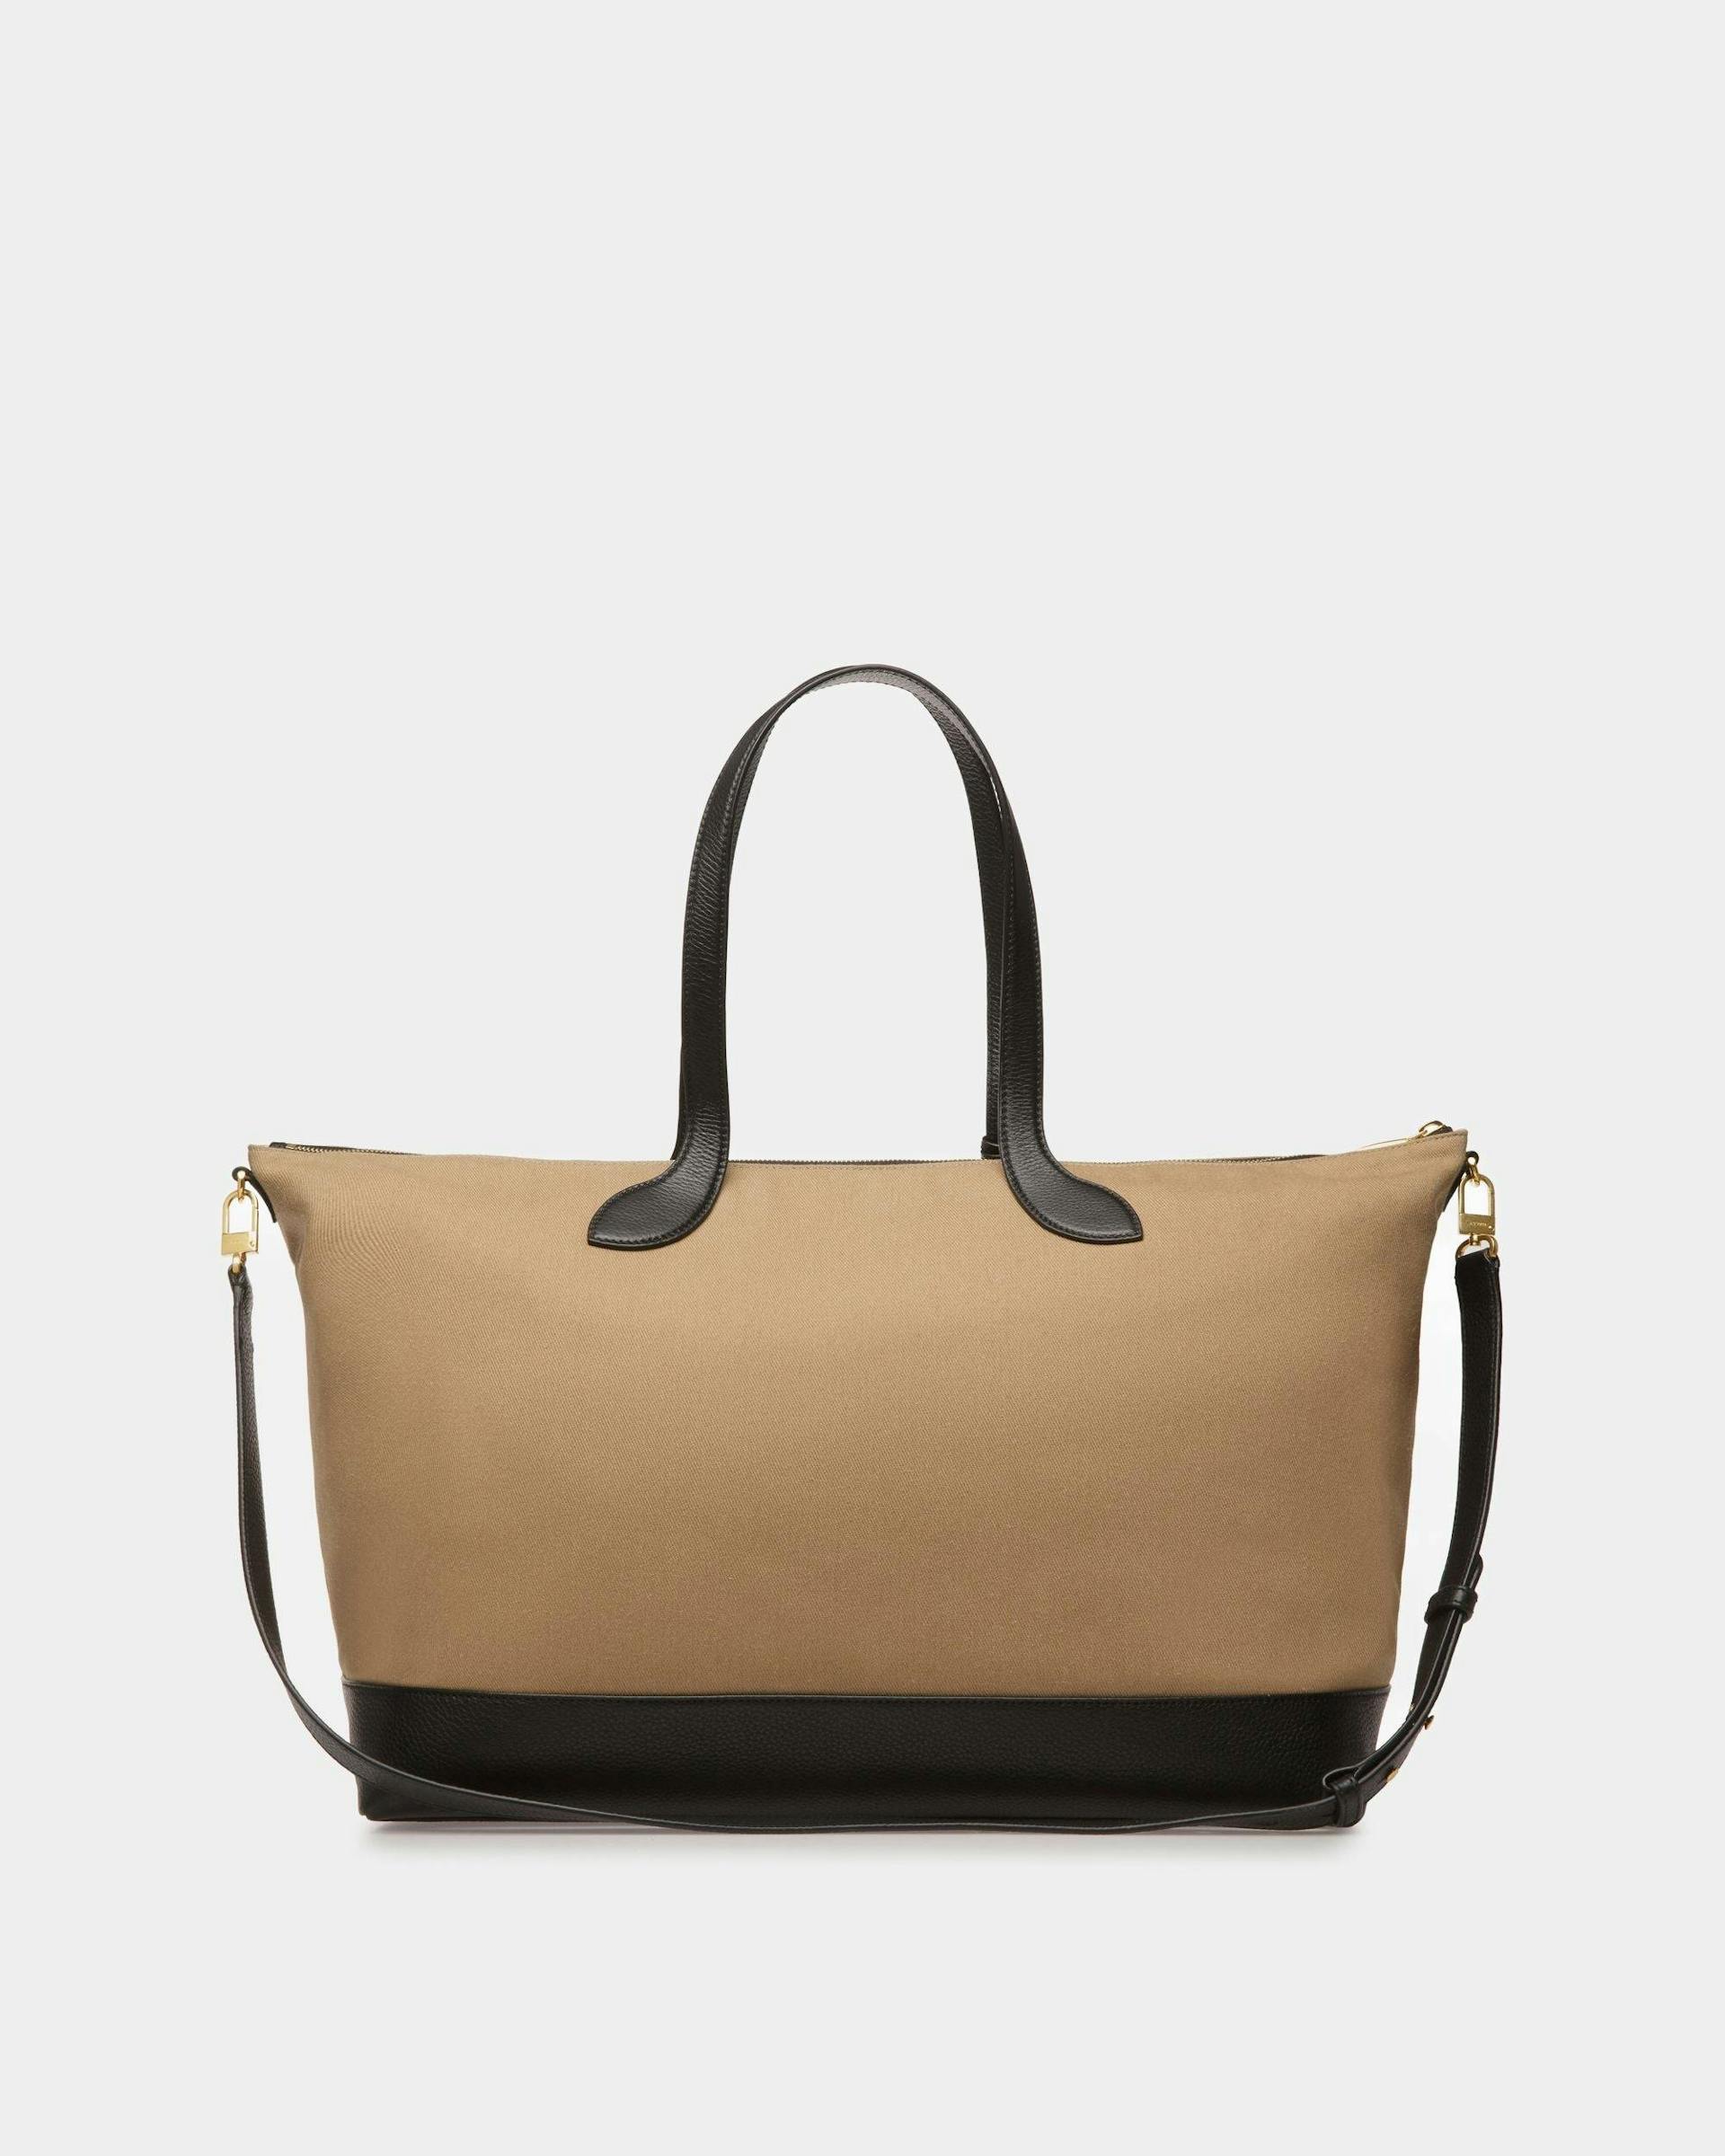 Women's Bar Tote Bag In sand And Black Fabric | Bally | Still Life Back